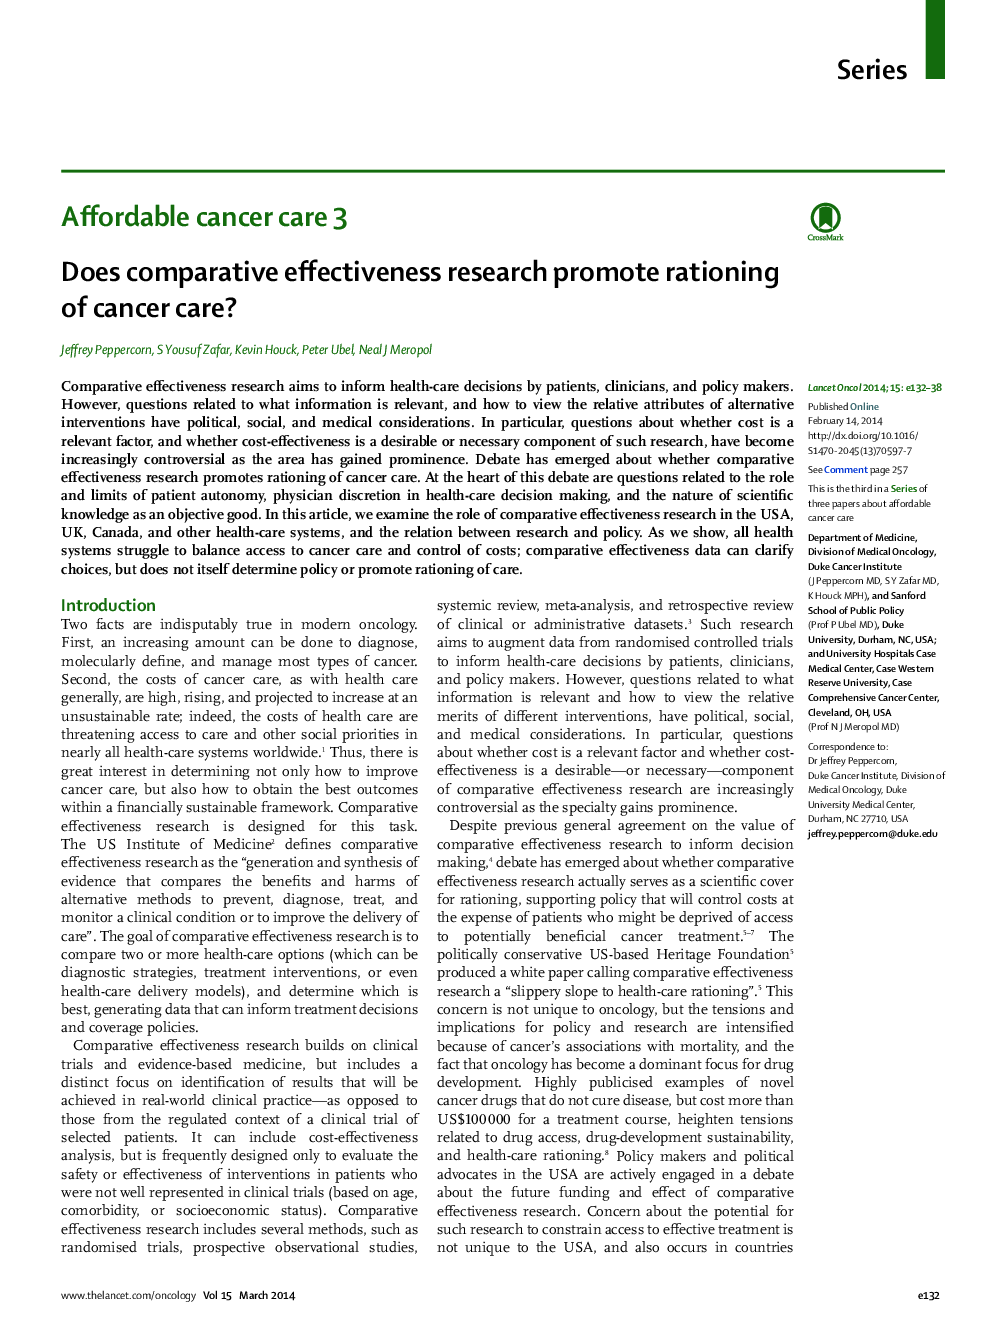 Does comparative effectiveness research promote rationing of cancer care?